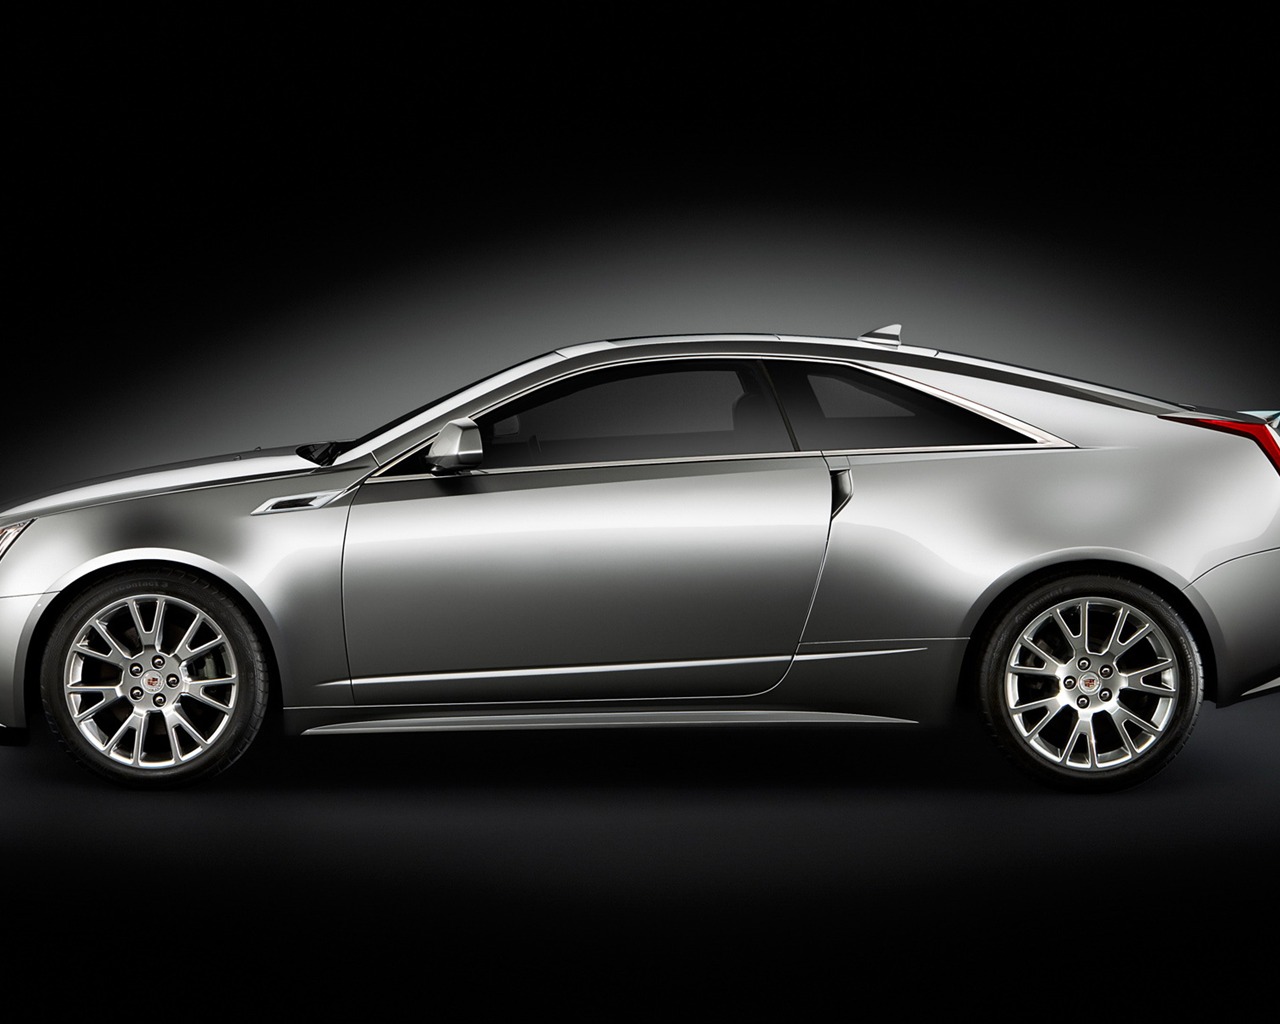 Cadillac CTS Coupe - 2011 HD Wallpaper #5 - 1280x1024